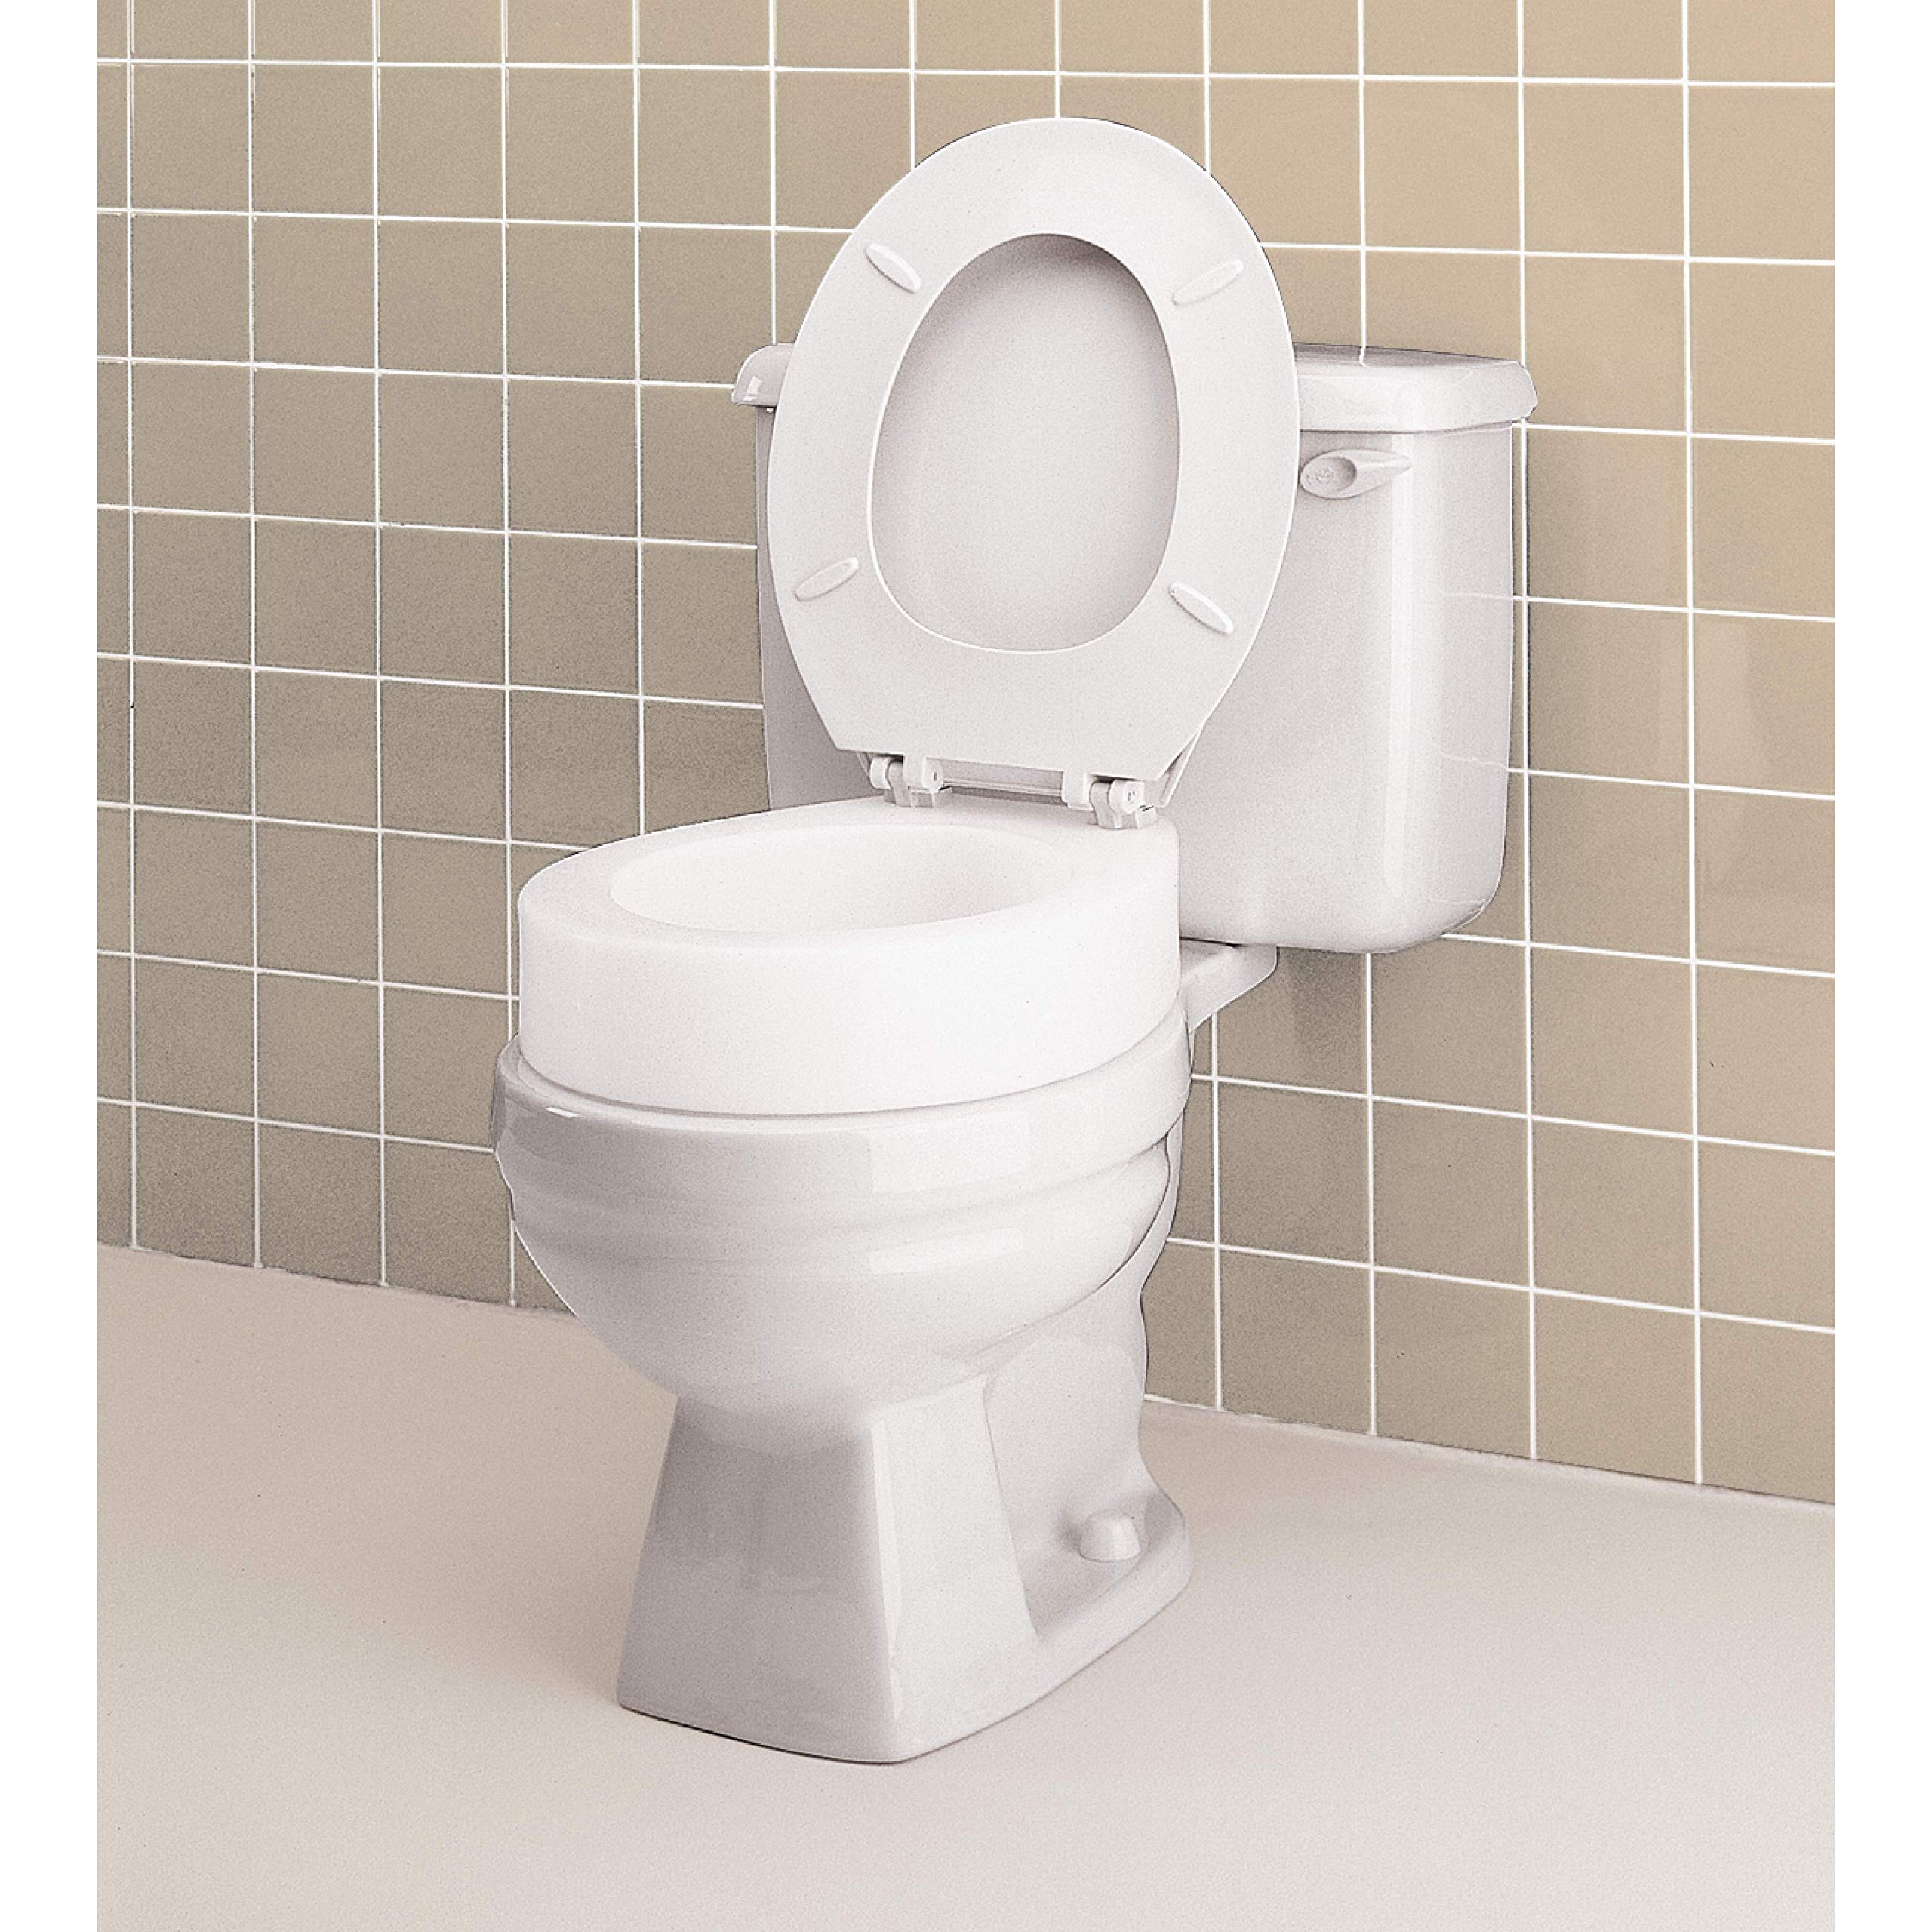 Carex Toilet Seat Riser, Elongated Raised Toilet Seat Adds 3.5 inches to Toilet Height, for Assistance Bending or Sitting, 300 Pound Weight Capacity Toilet Riser